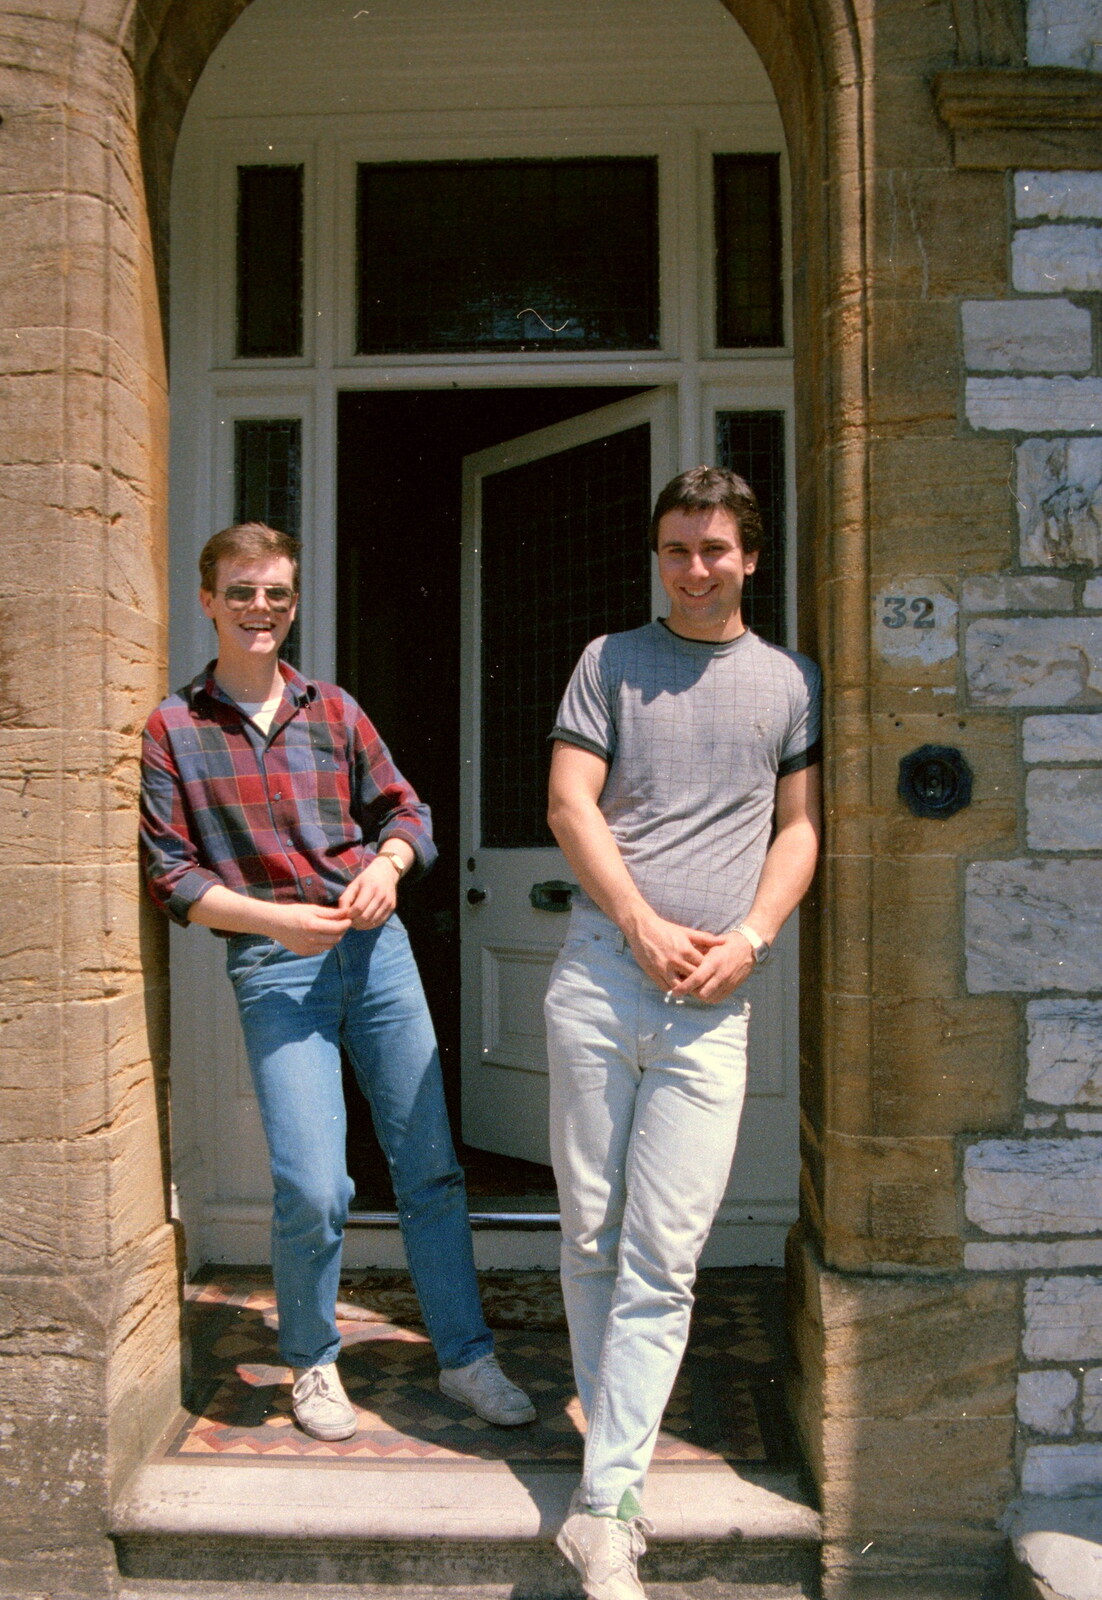 Dave and Riki at the front door of Number 32 from Uni: Riki And Dave's Place, Sutherland Road, Plymouth - 12th May 1986